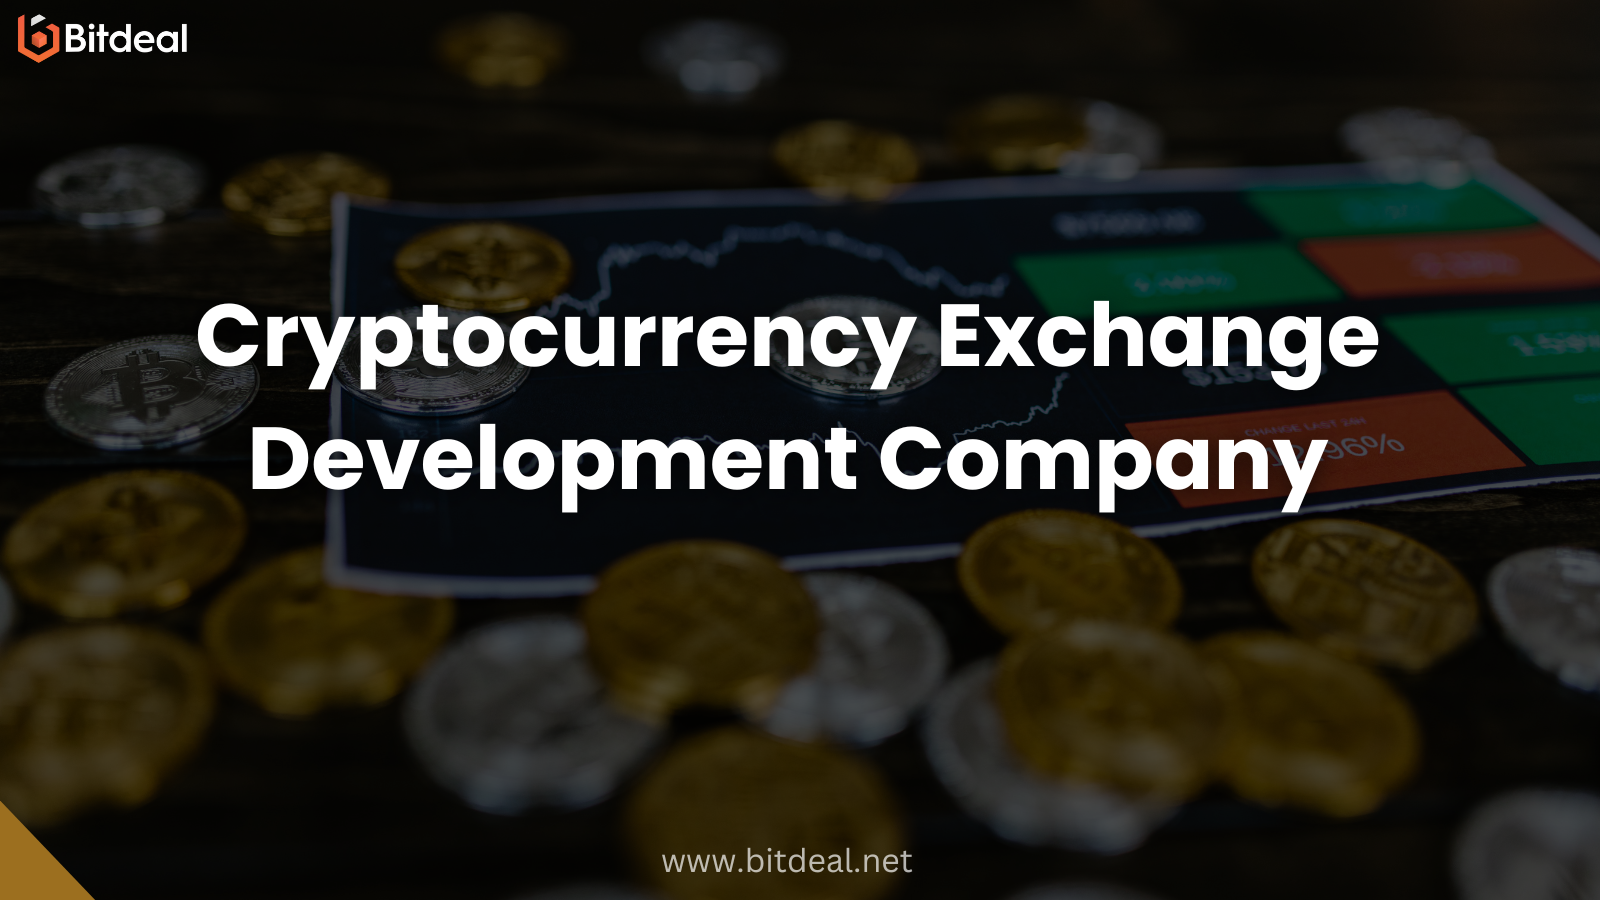 The Guide to Cryptocurrency Exchange Development